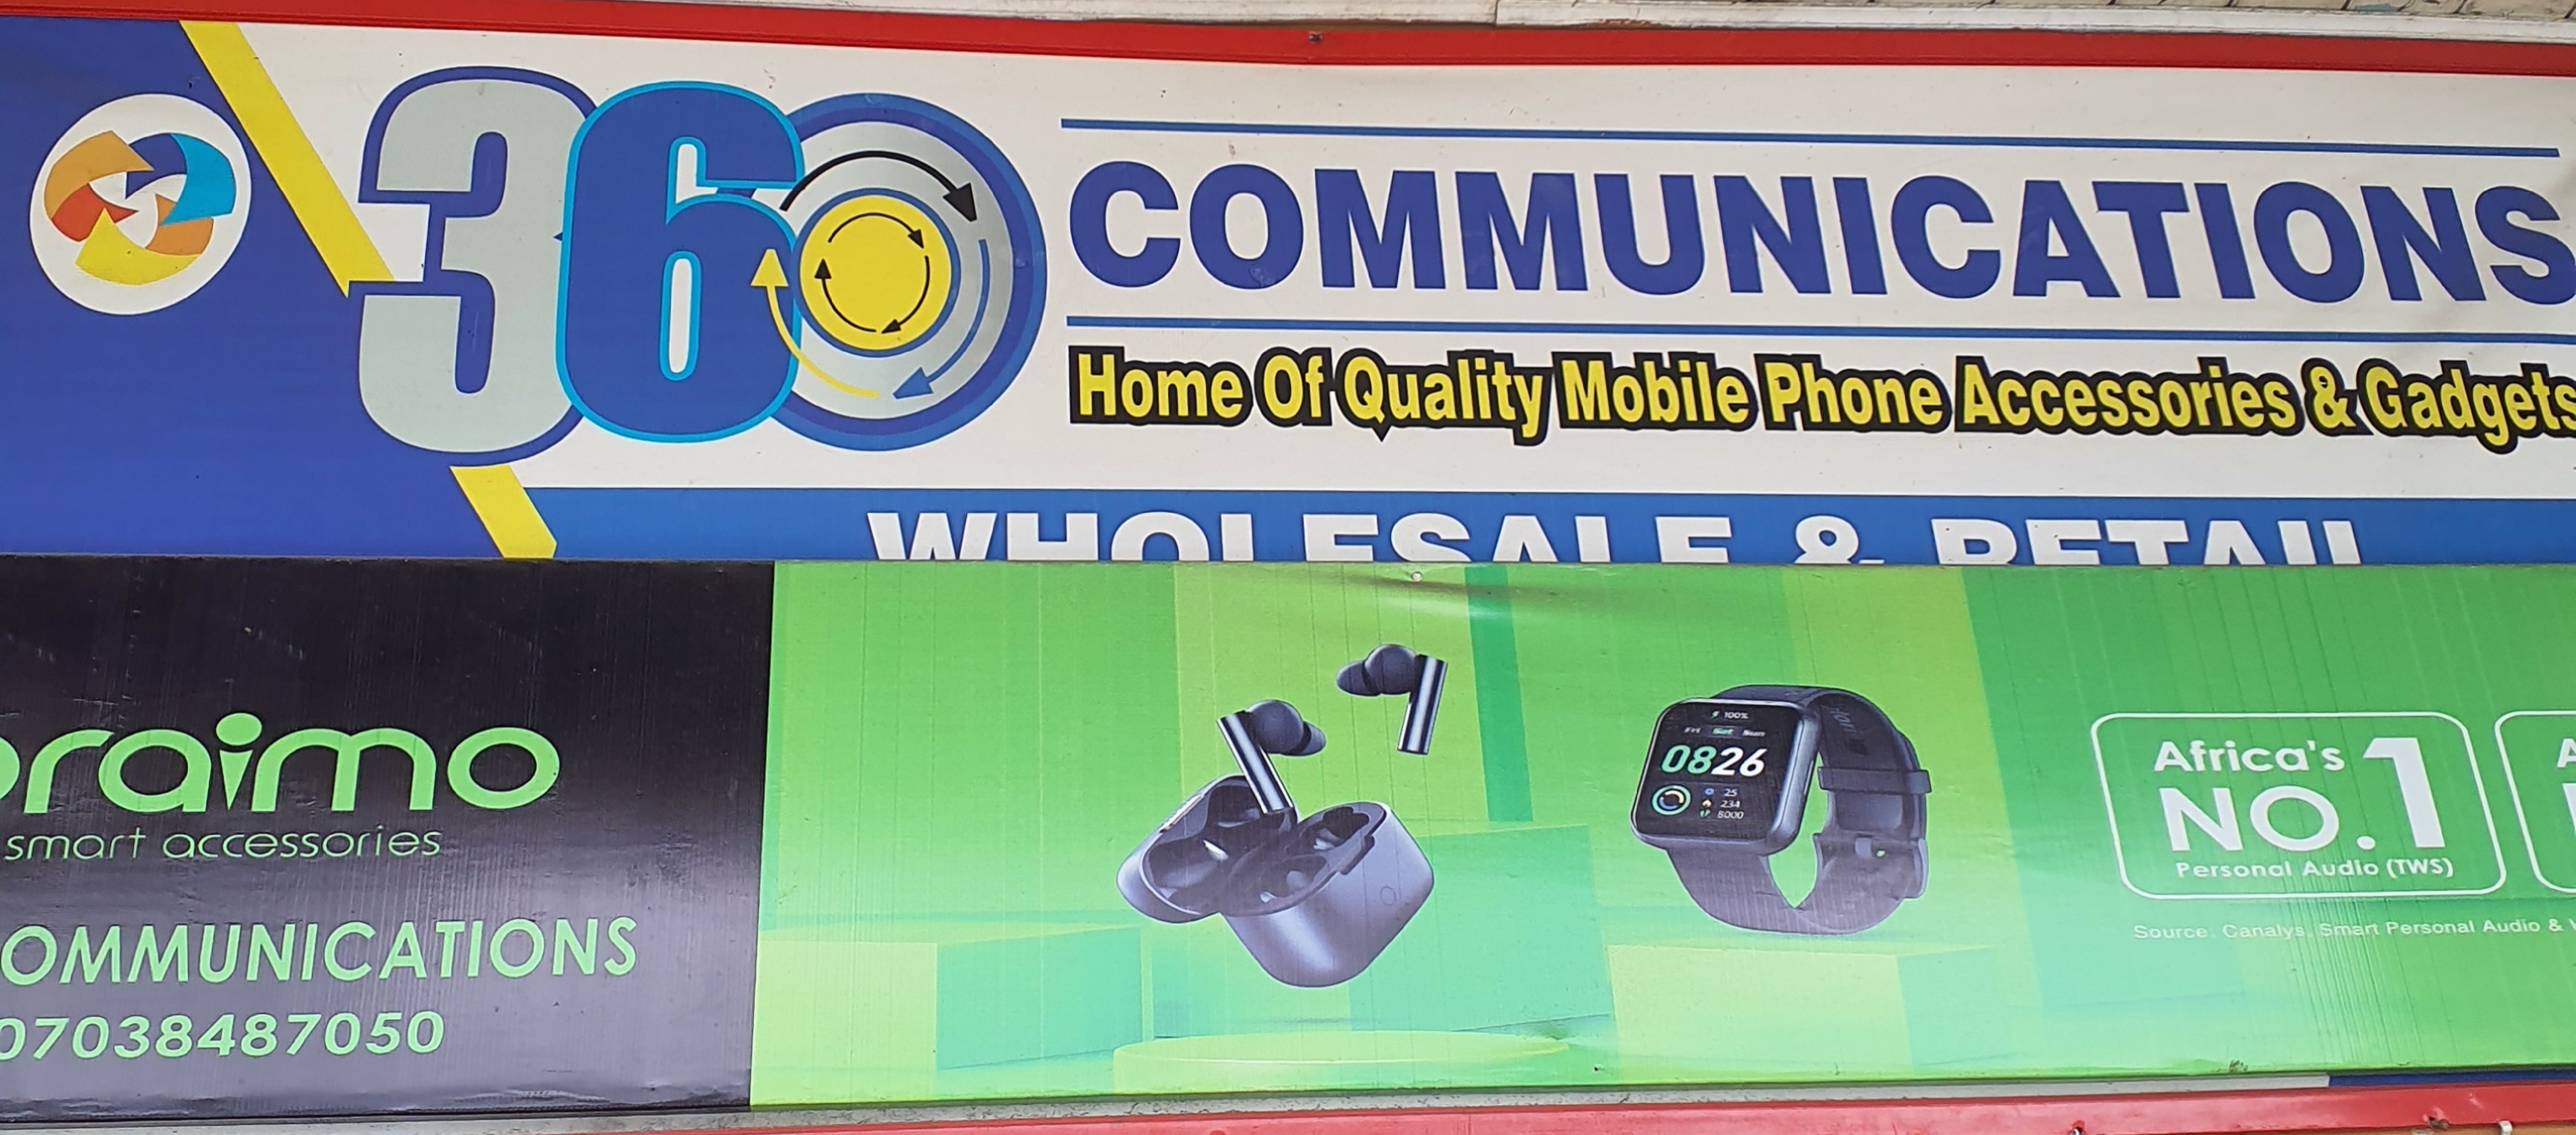 360 Communications(phones and accessories) Banner